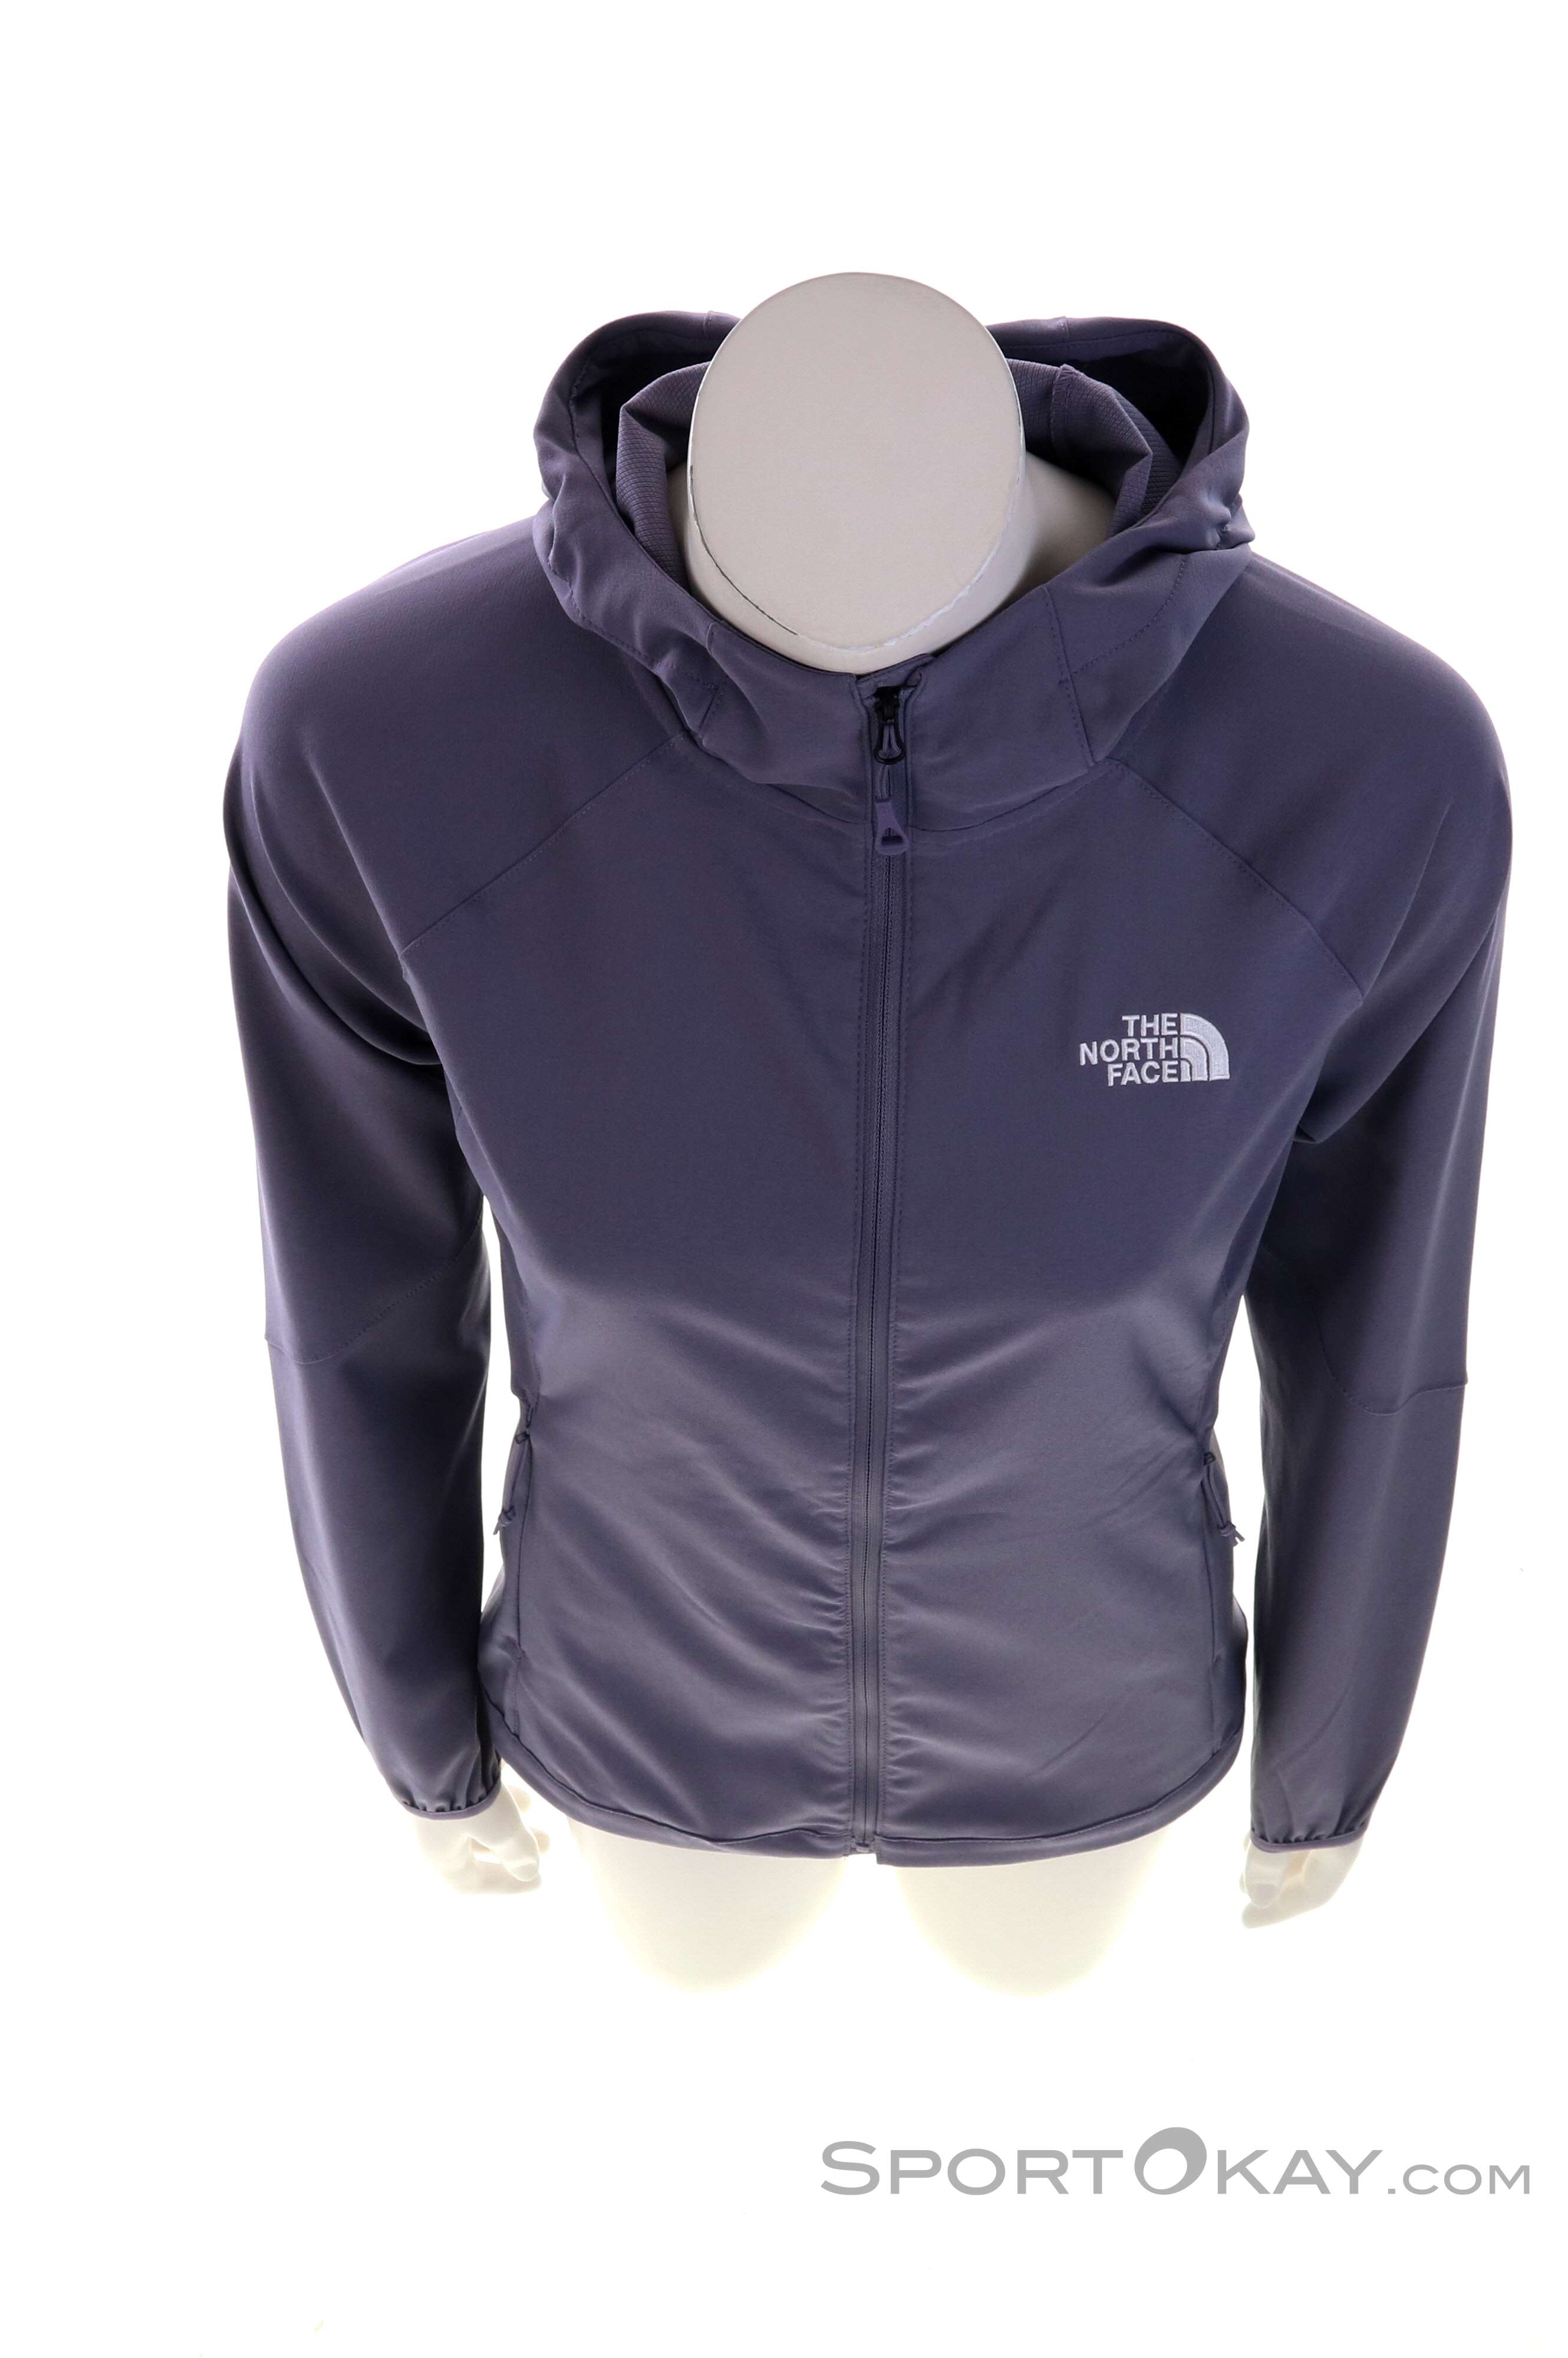 The North Face - Jacket - - Outdoor Outdoor Jackets Women All Apex Outdoor Nimble - Clothing